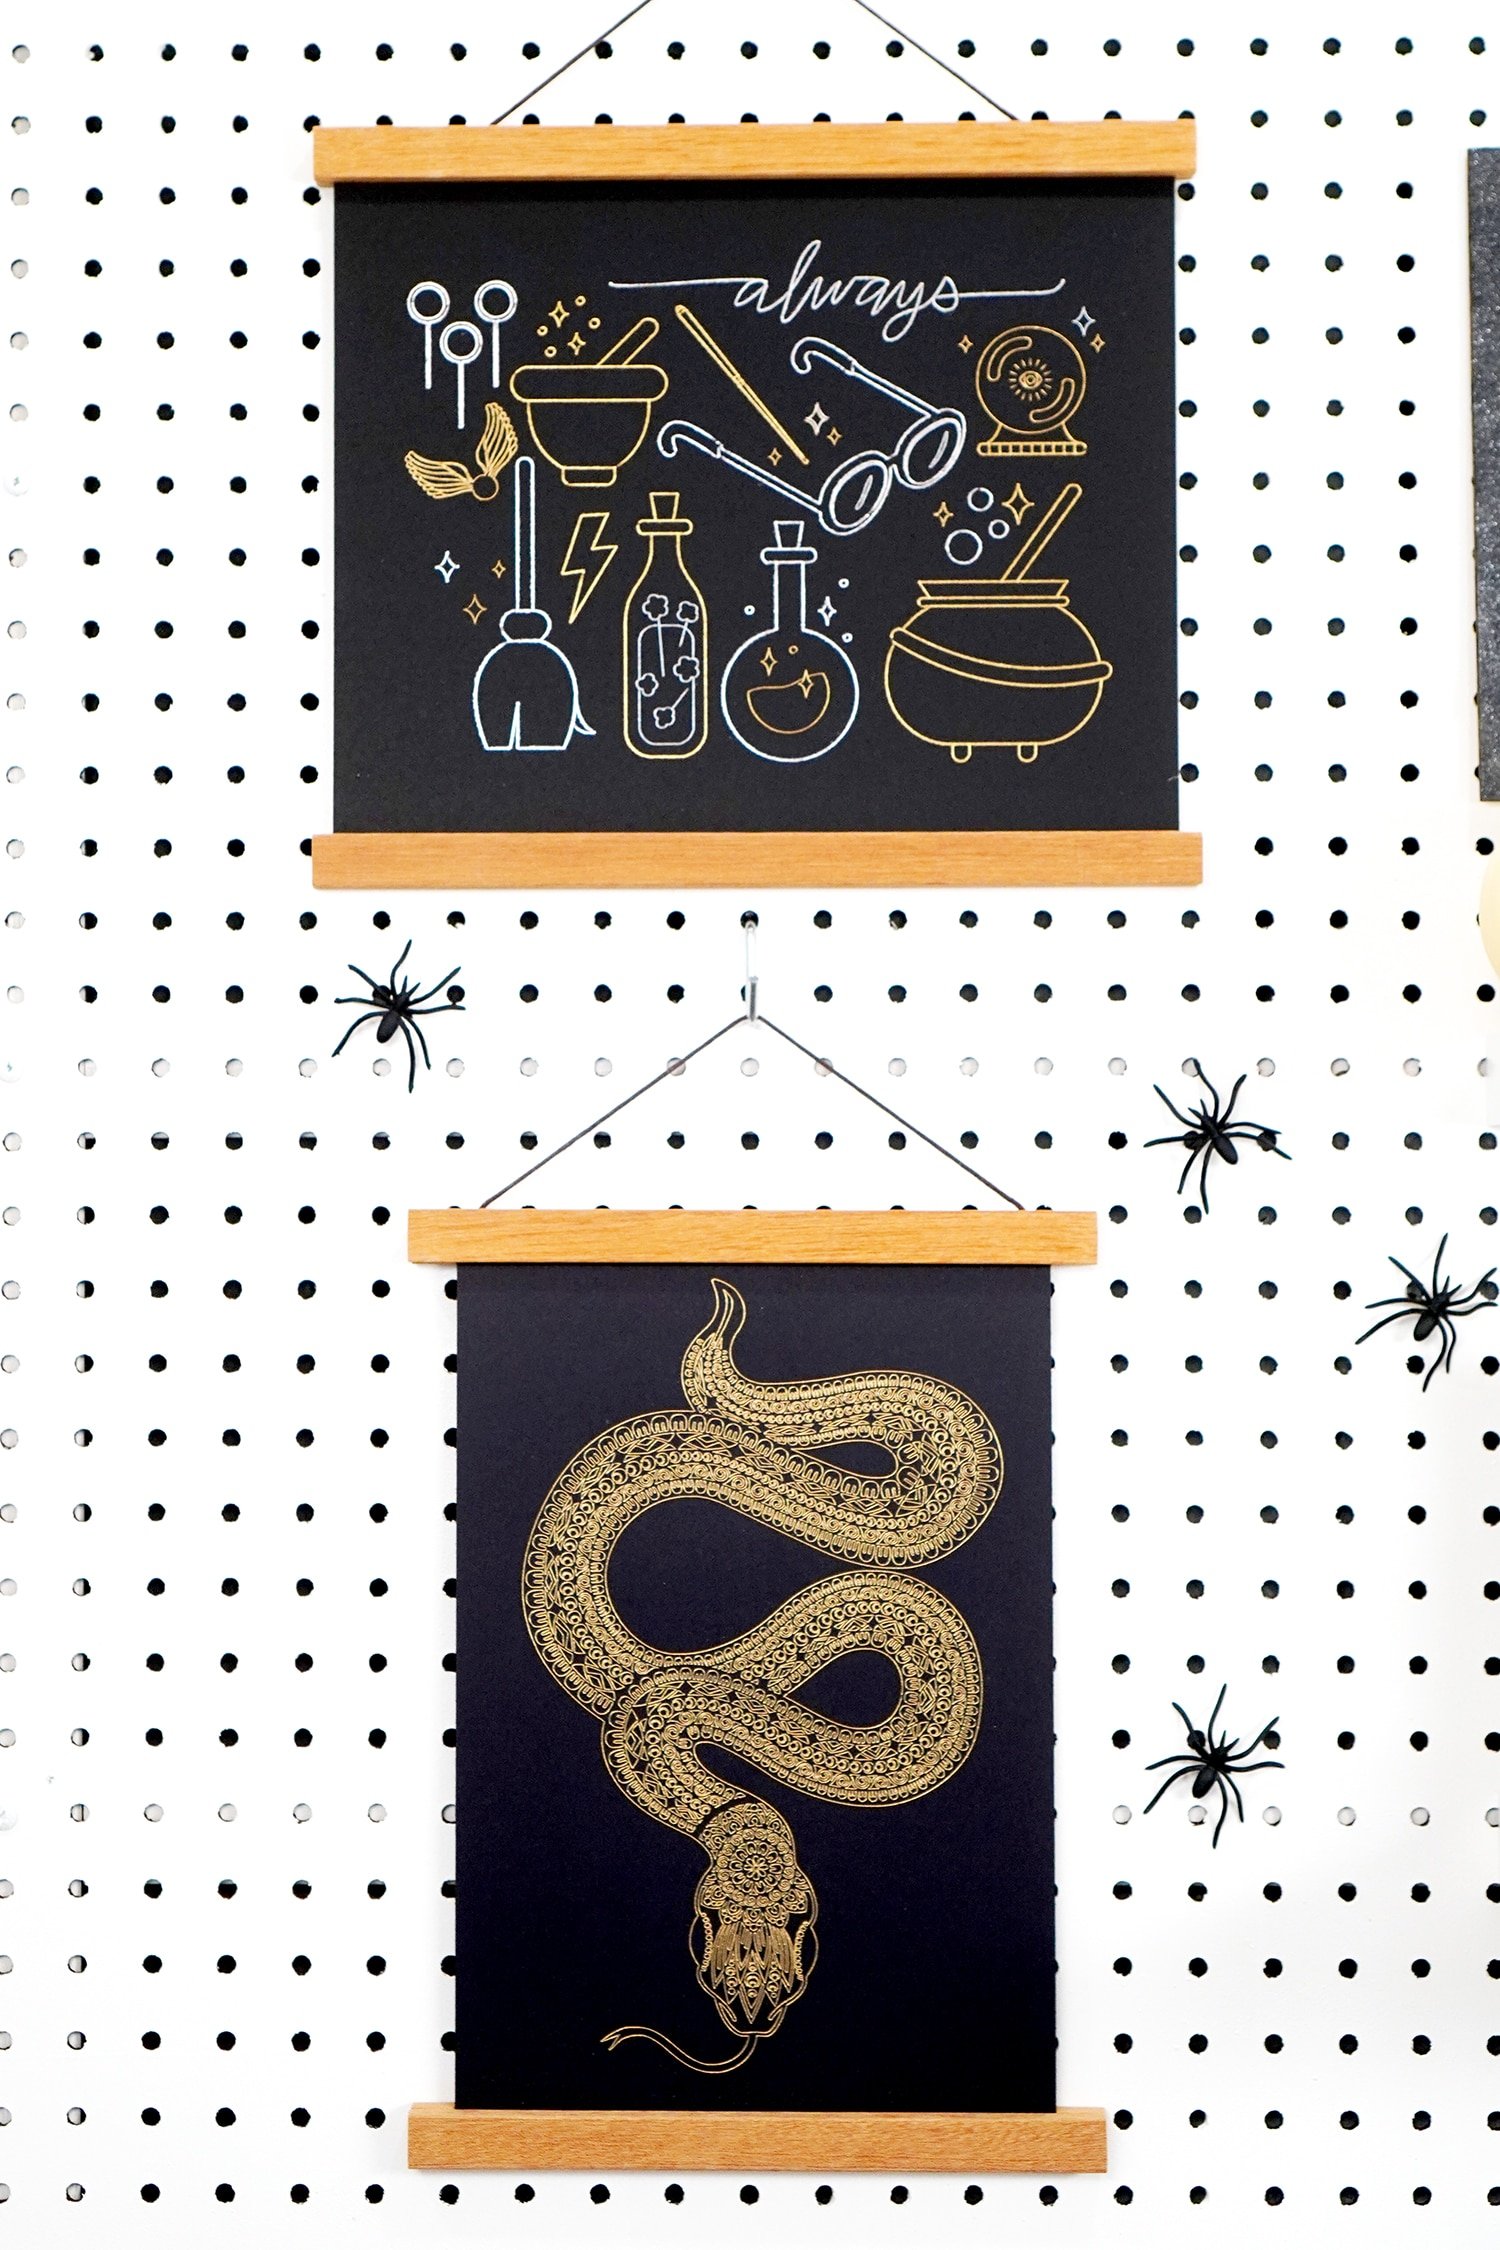 Halloween foil art prints (snake and wizard) hanging on pegboard with spiders